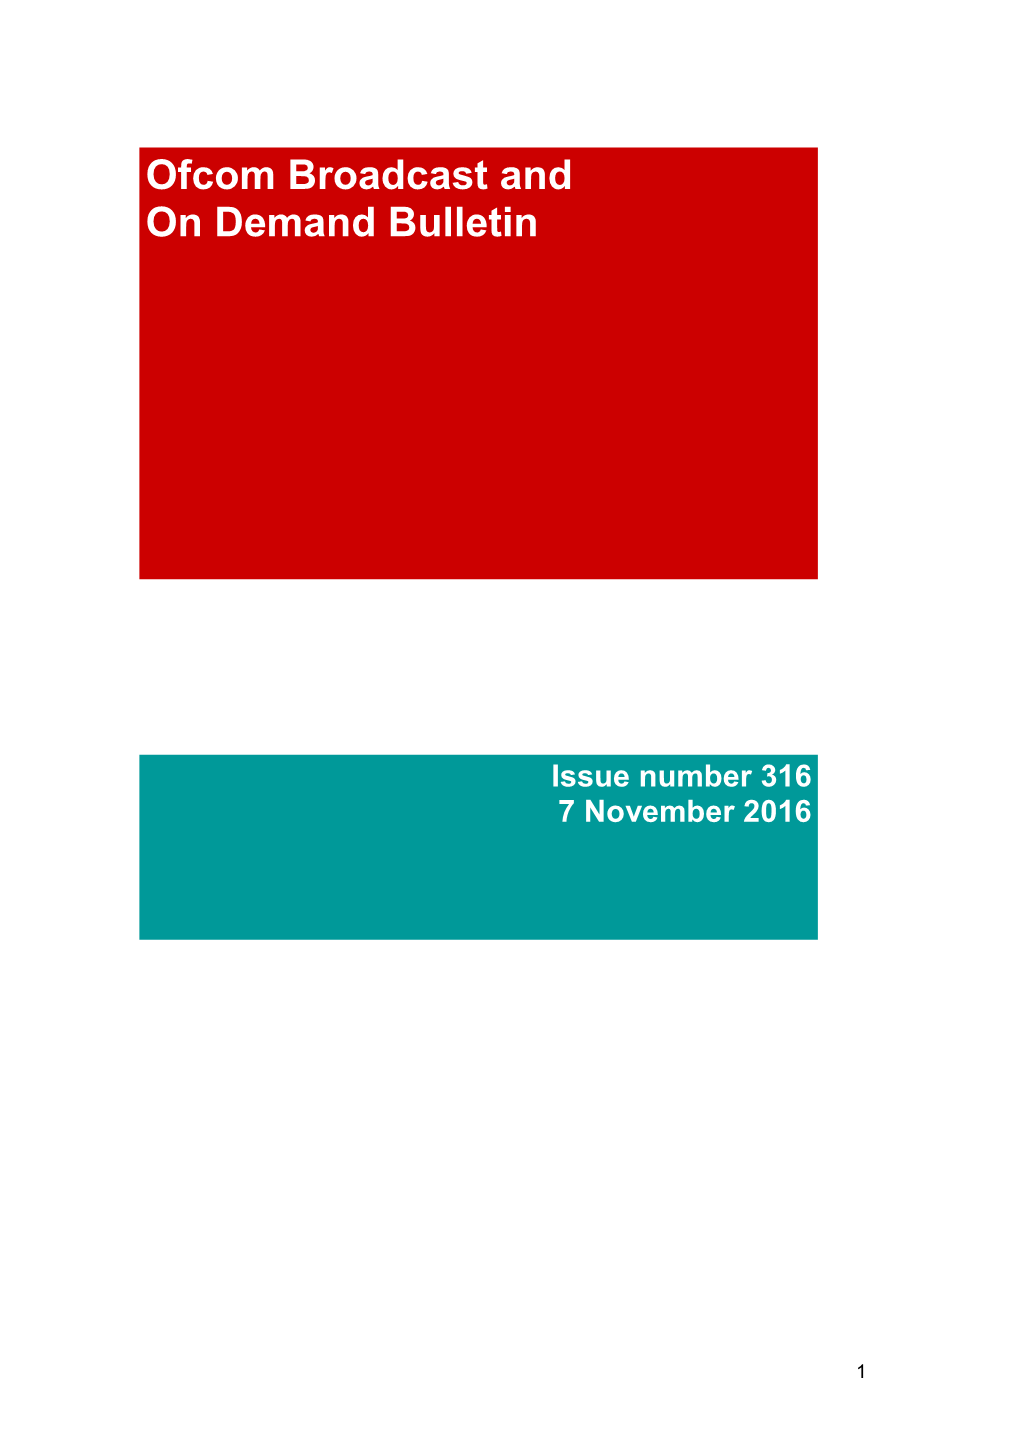 Broadcast and on Demand Bulletin Issue Number 316 07/11/16